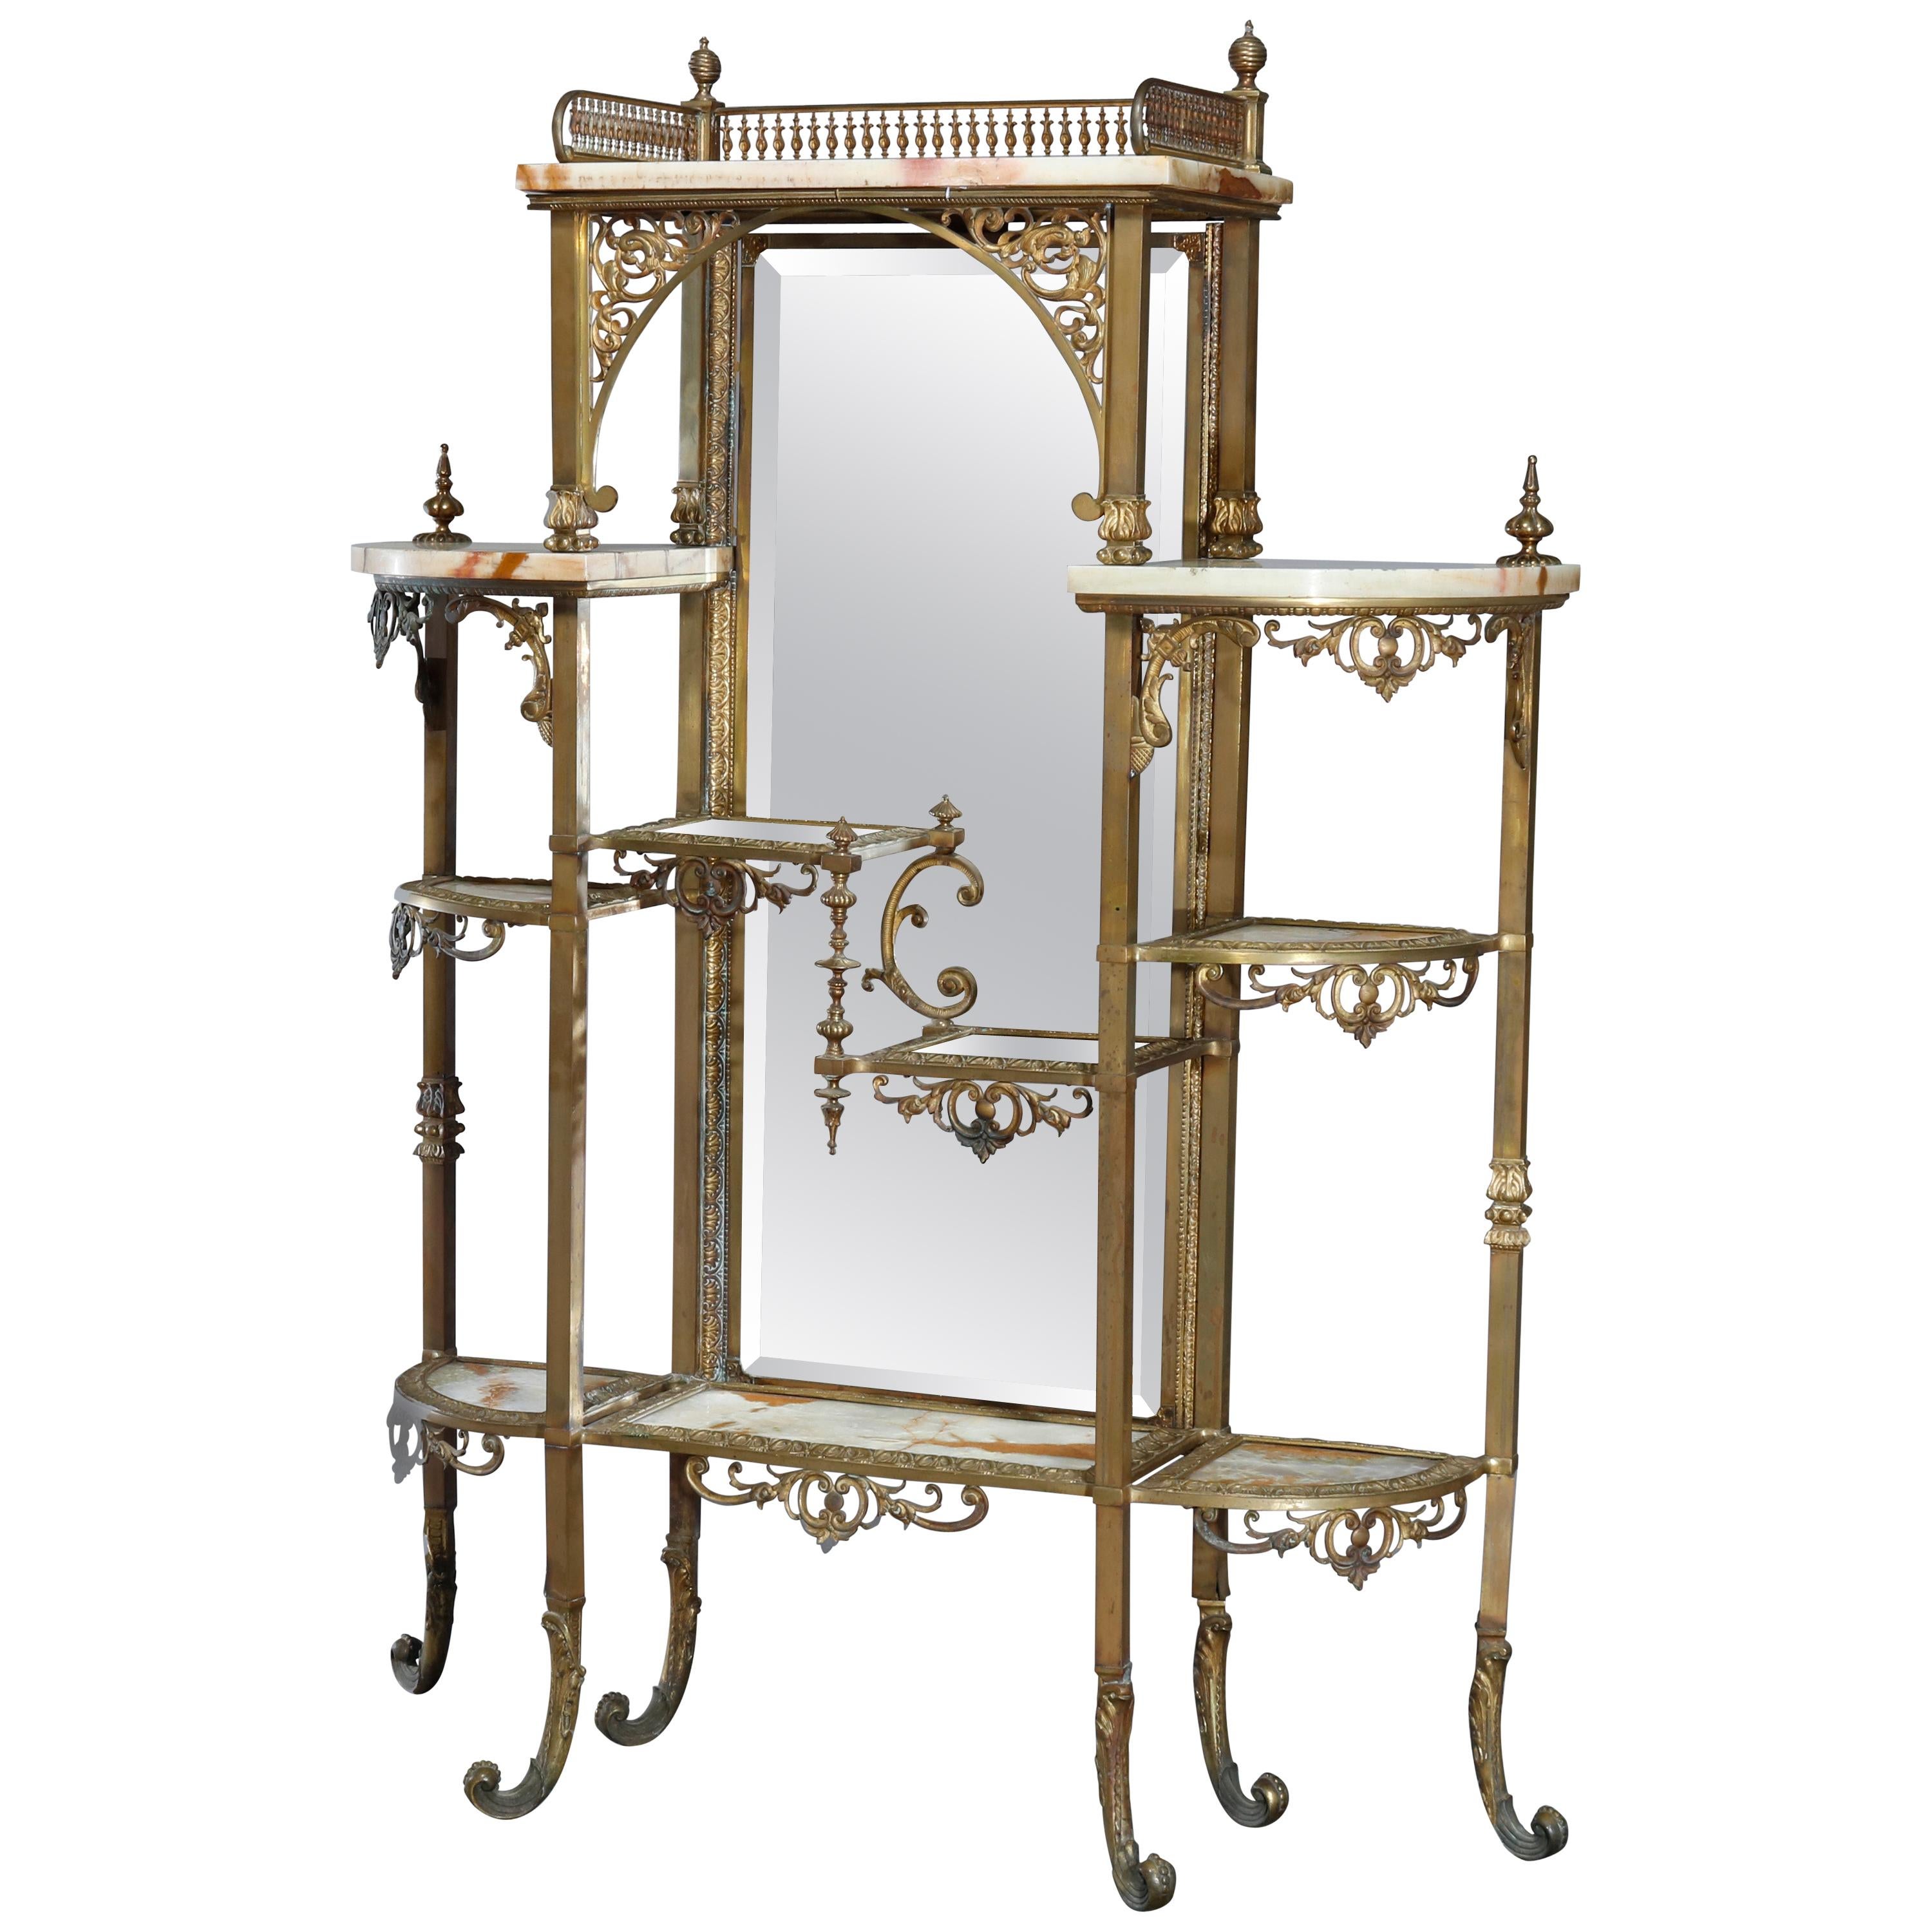 Antique French Victorian Bronze and Onyx Mirrored Étagère, circa 1880